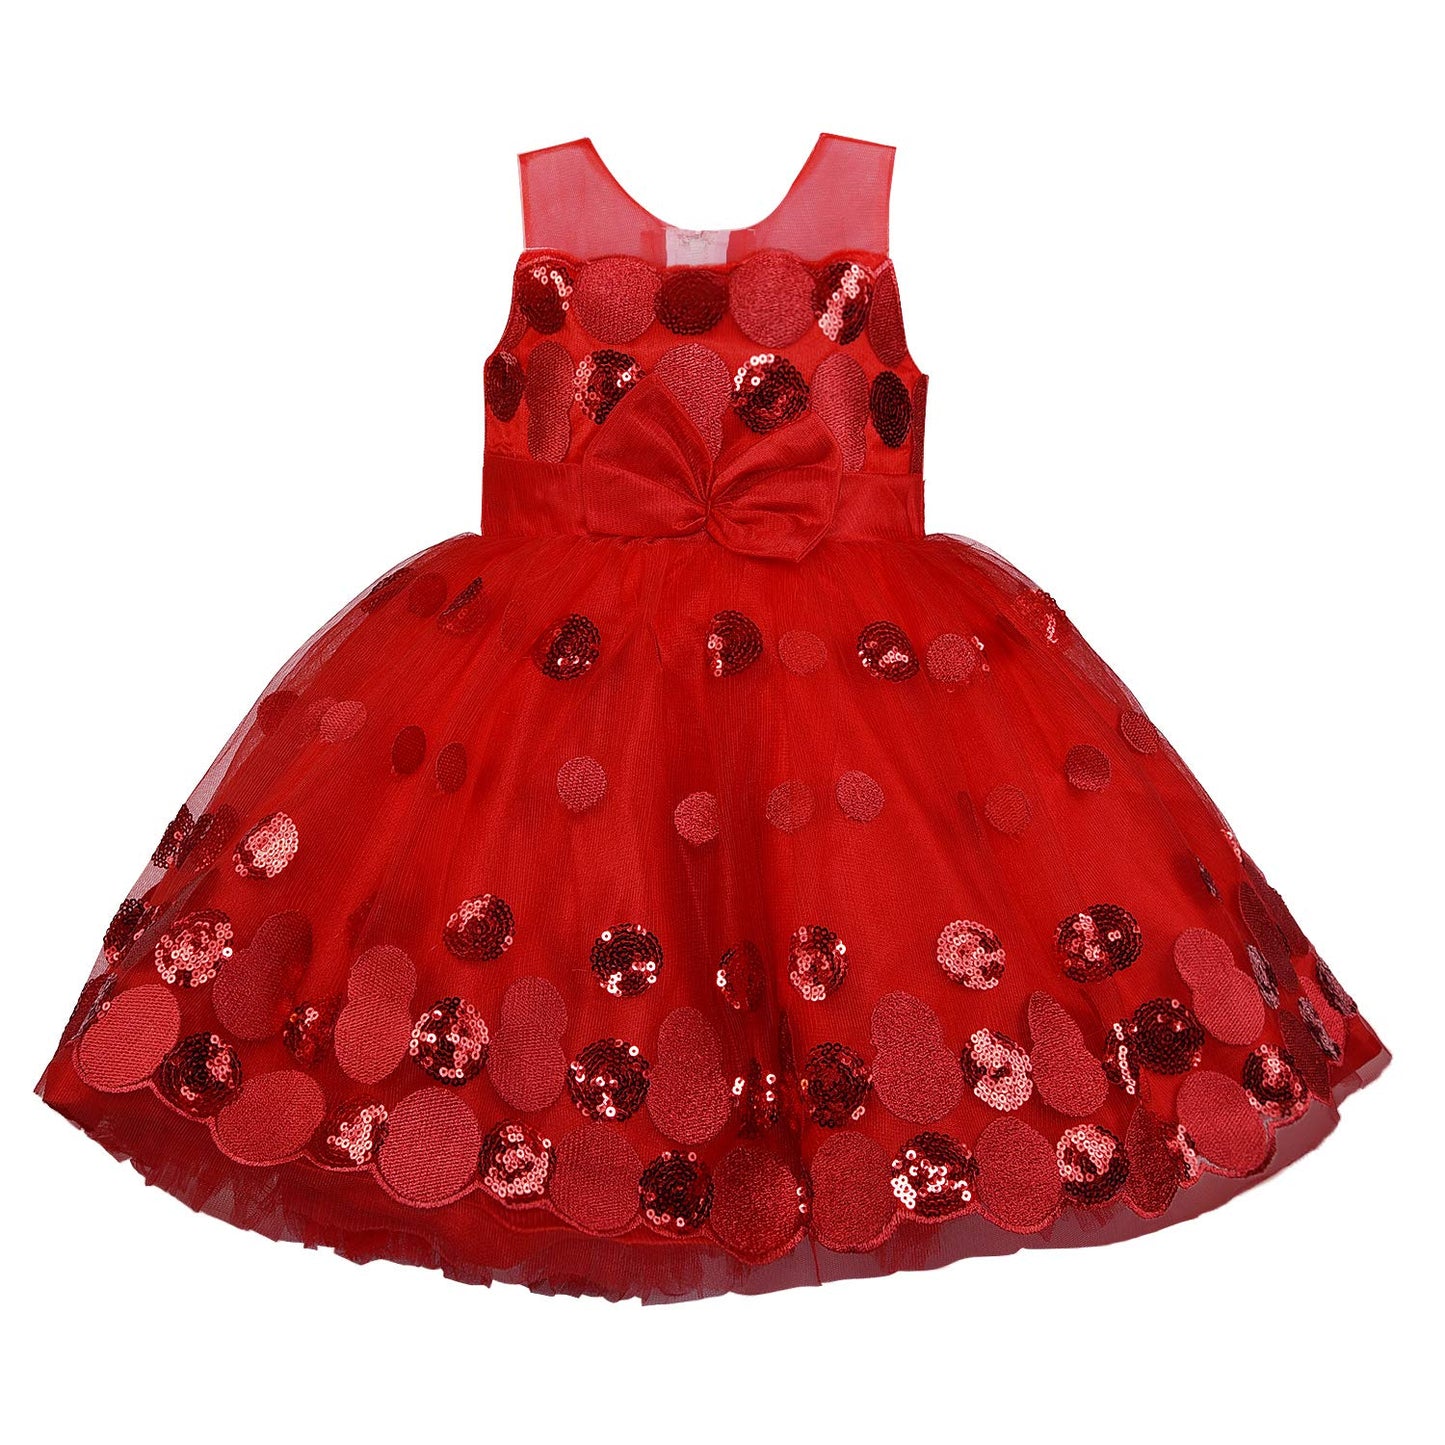 Girls Fit and Flair Partywear Dress